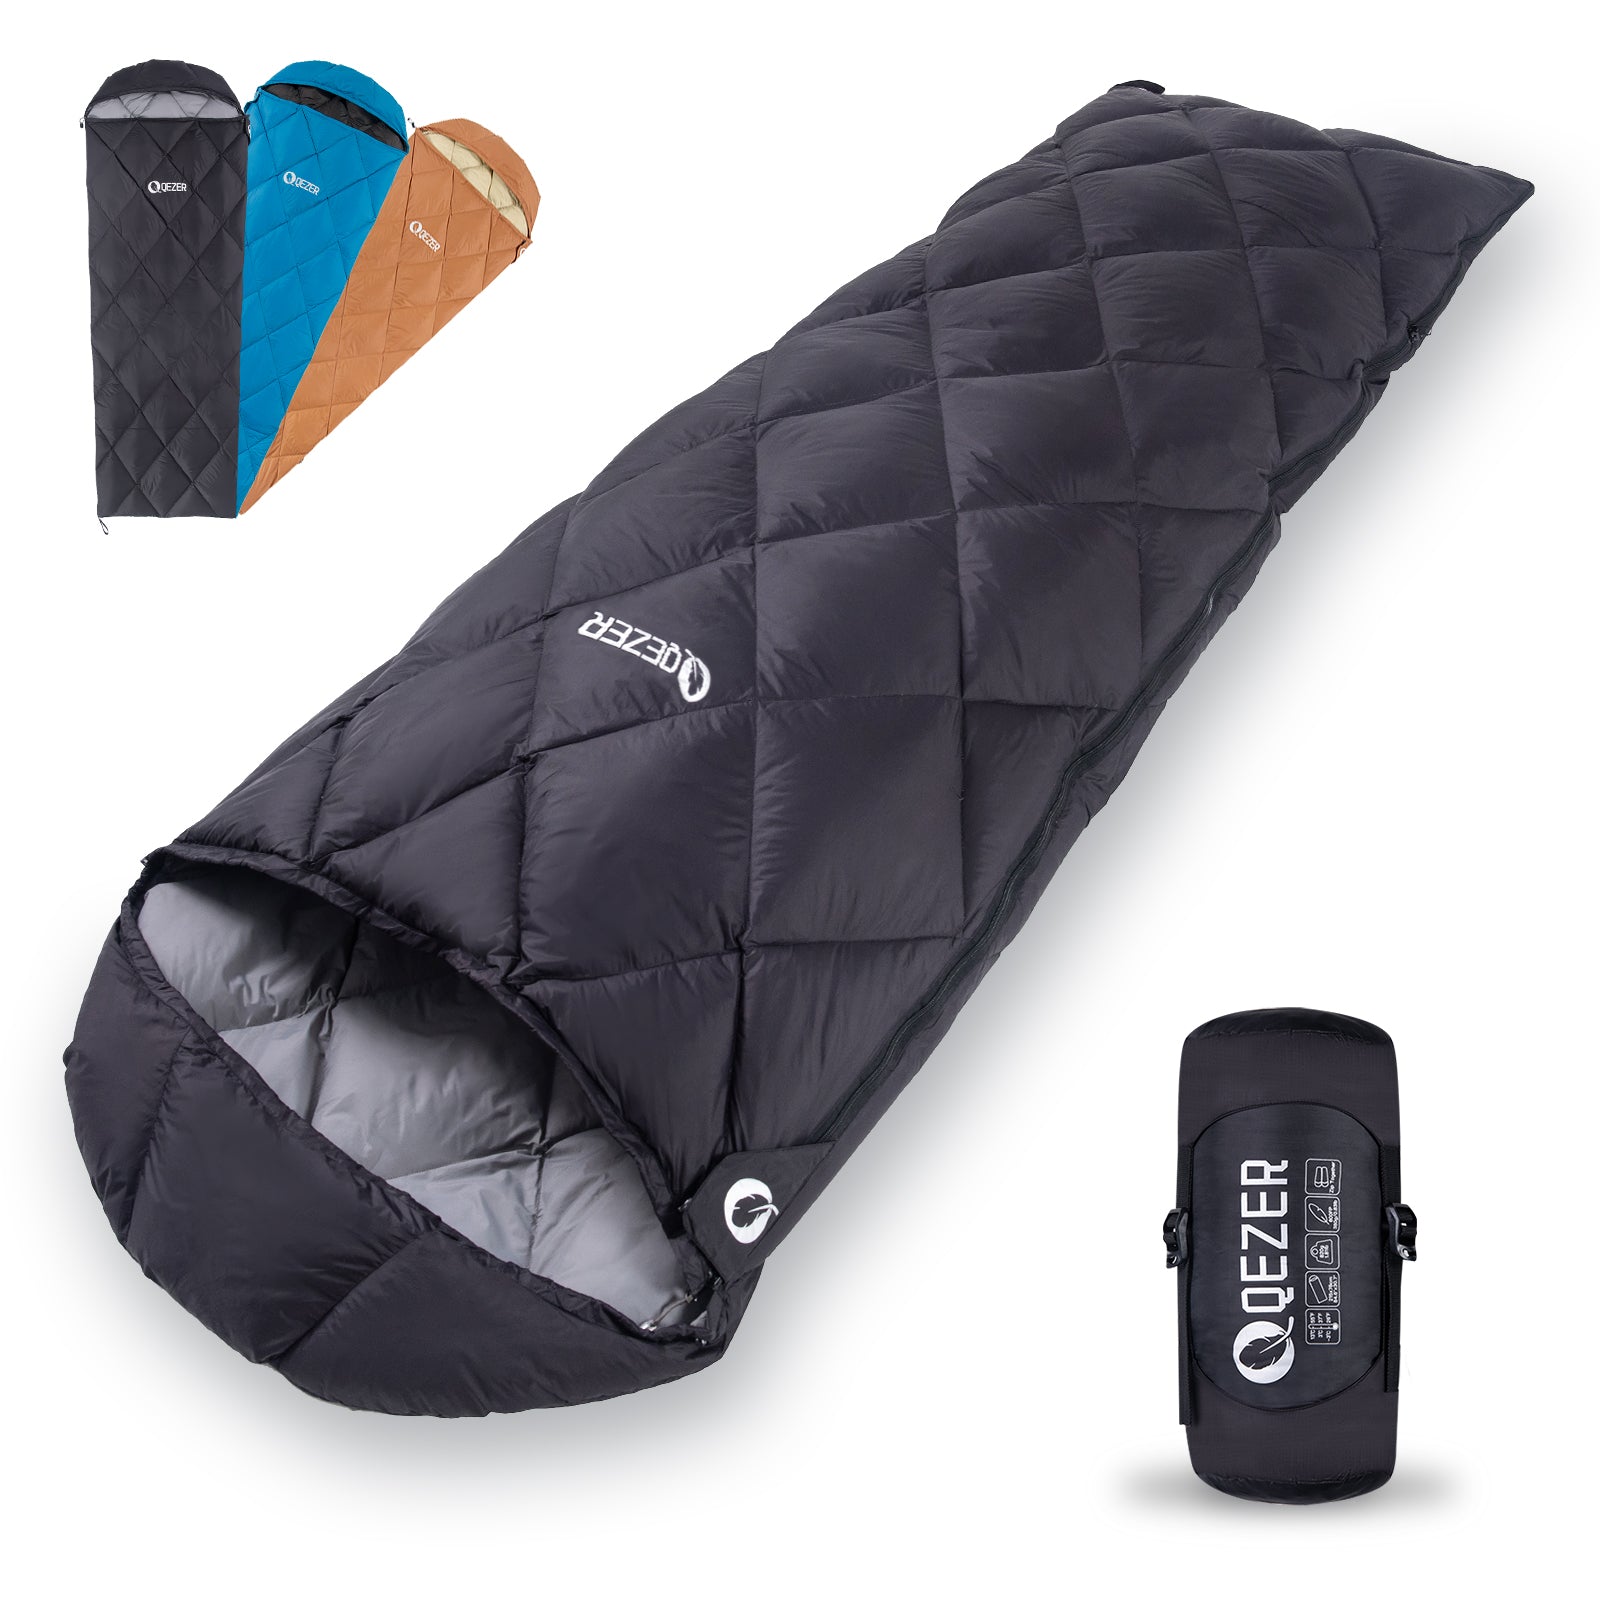 It's in the Bag: How to Choose the Best Sleeping Bag for Travel | Anywhere  – Travel Outlandish